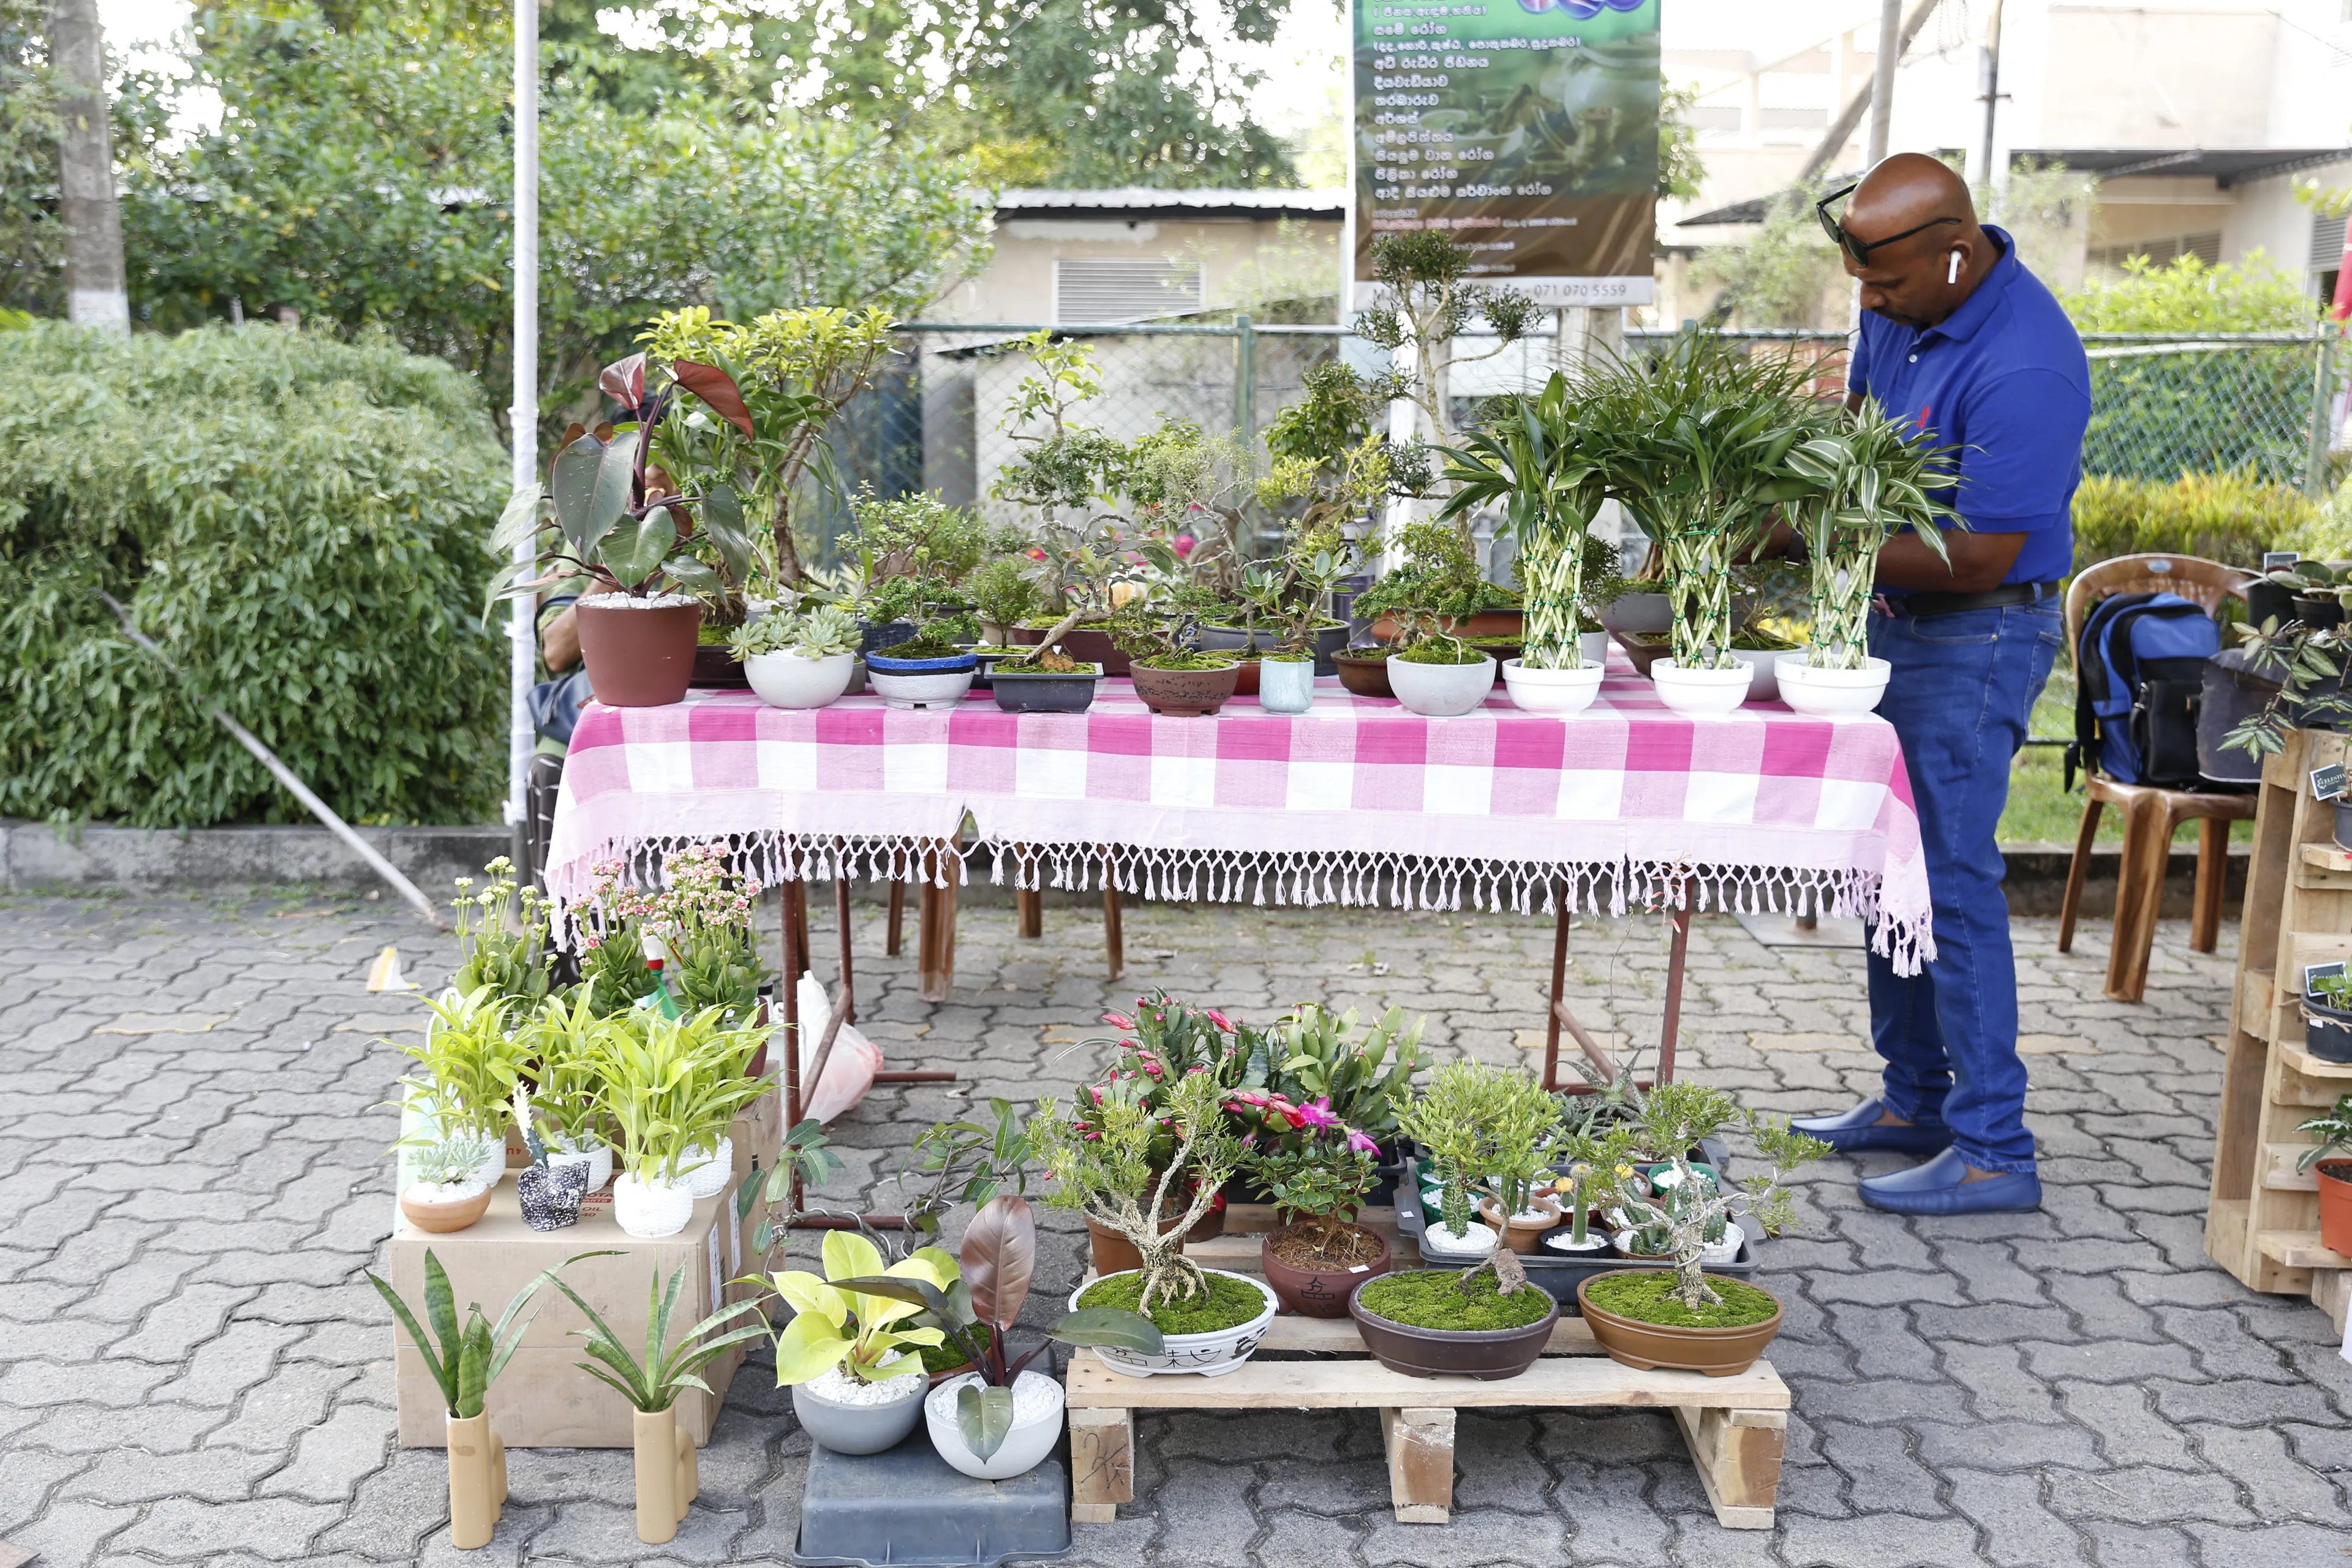 stand full of plants at People's Market